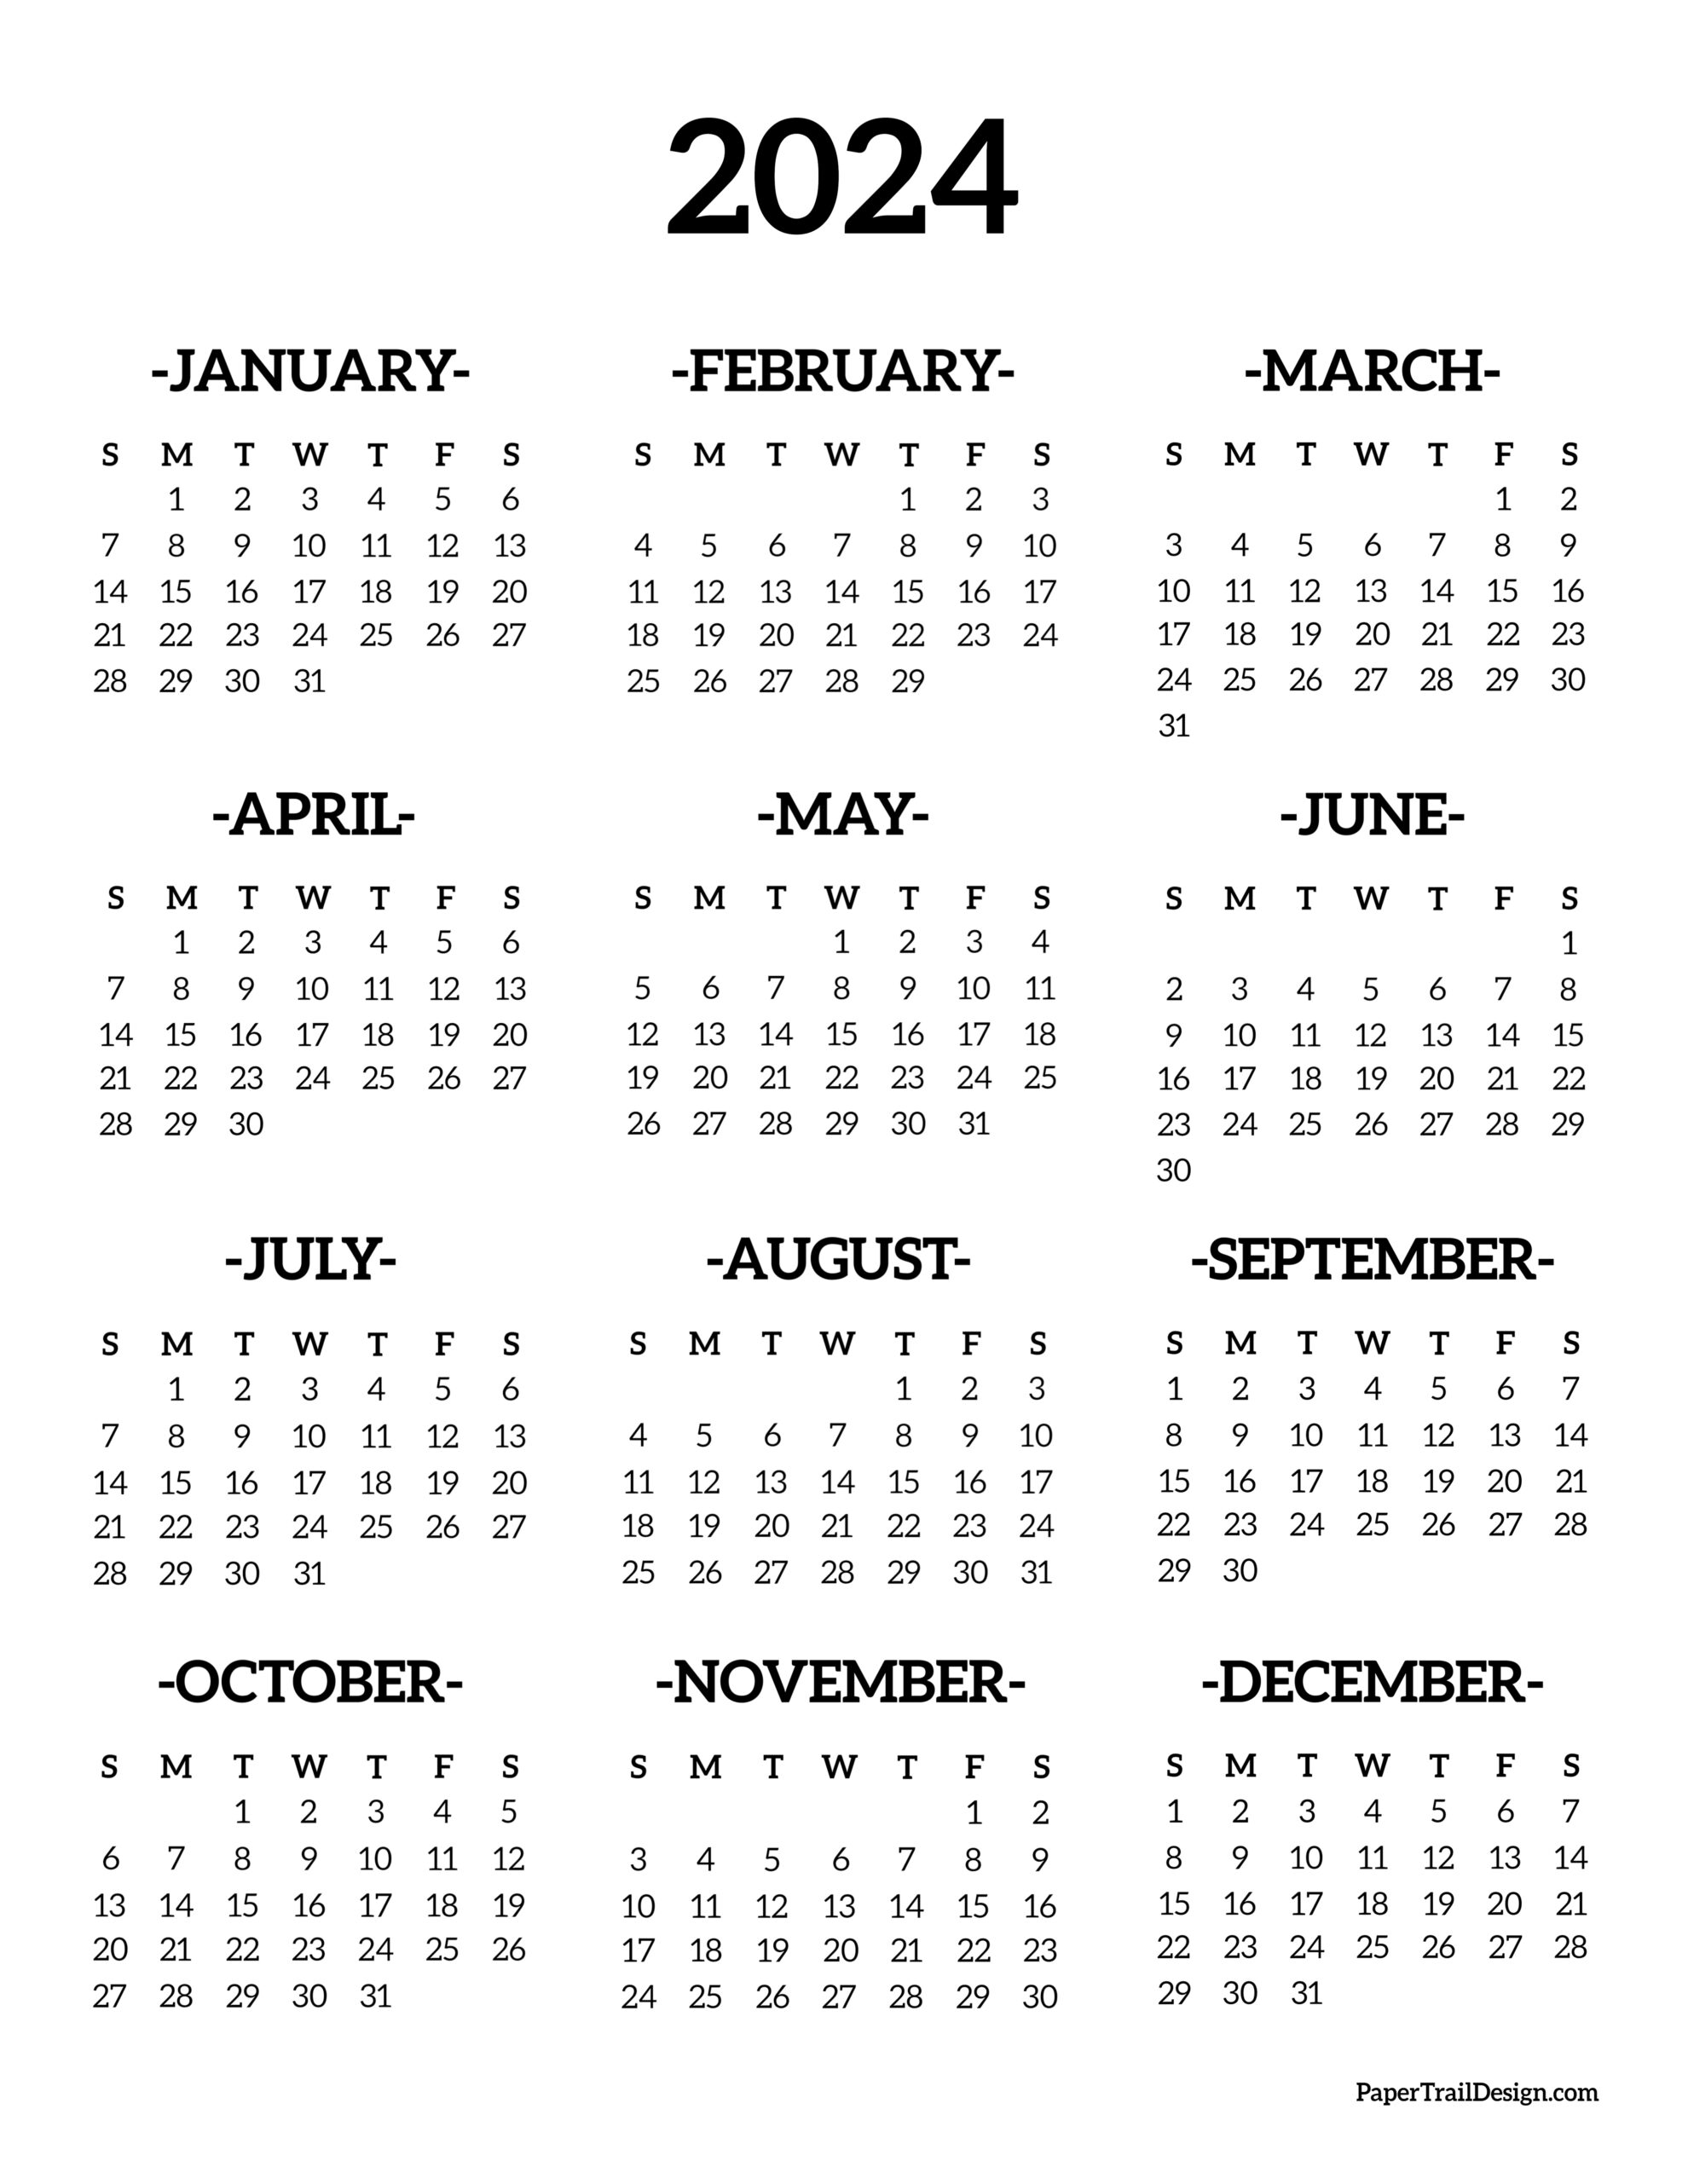 2024 Year At A Glance Calendar Printable Free Downloadable Bonny Christy